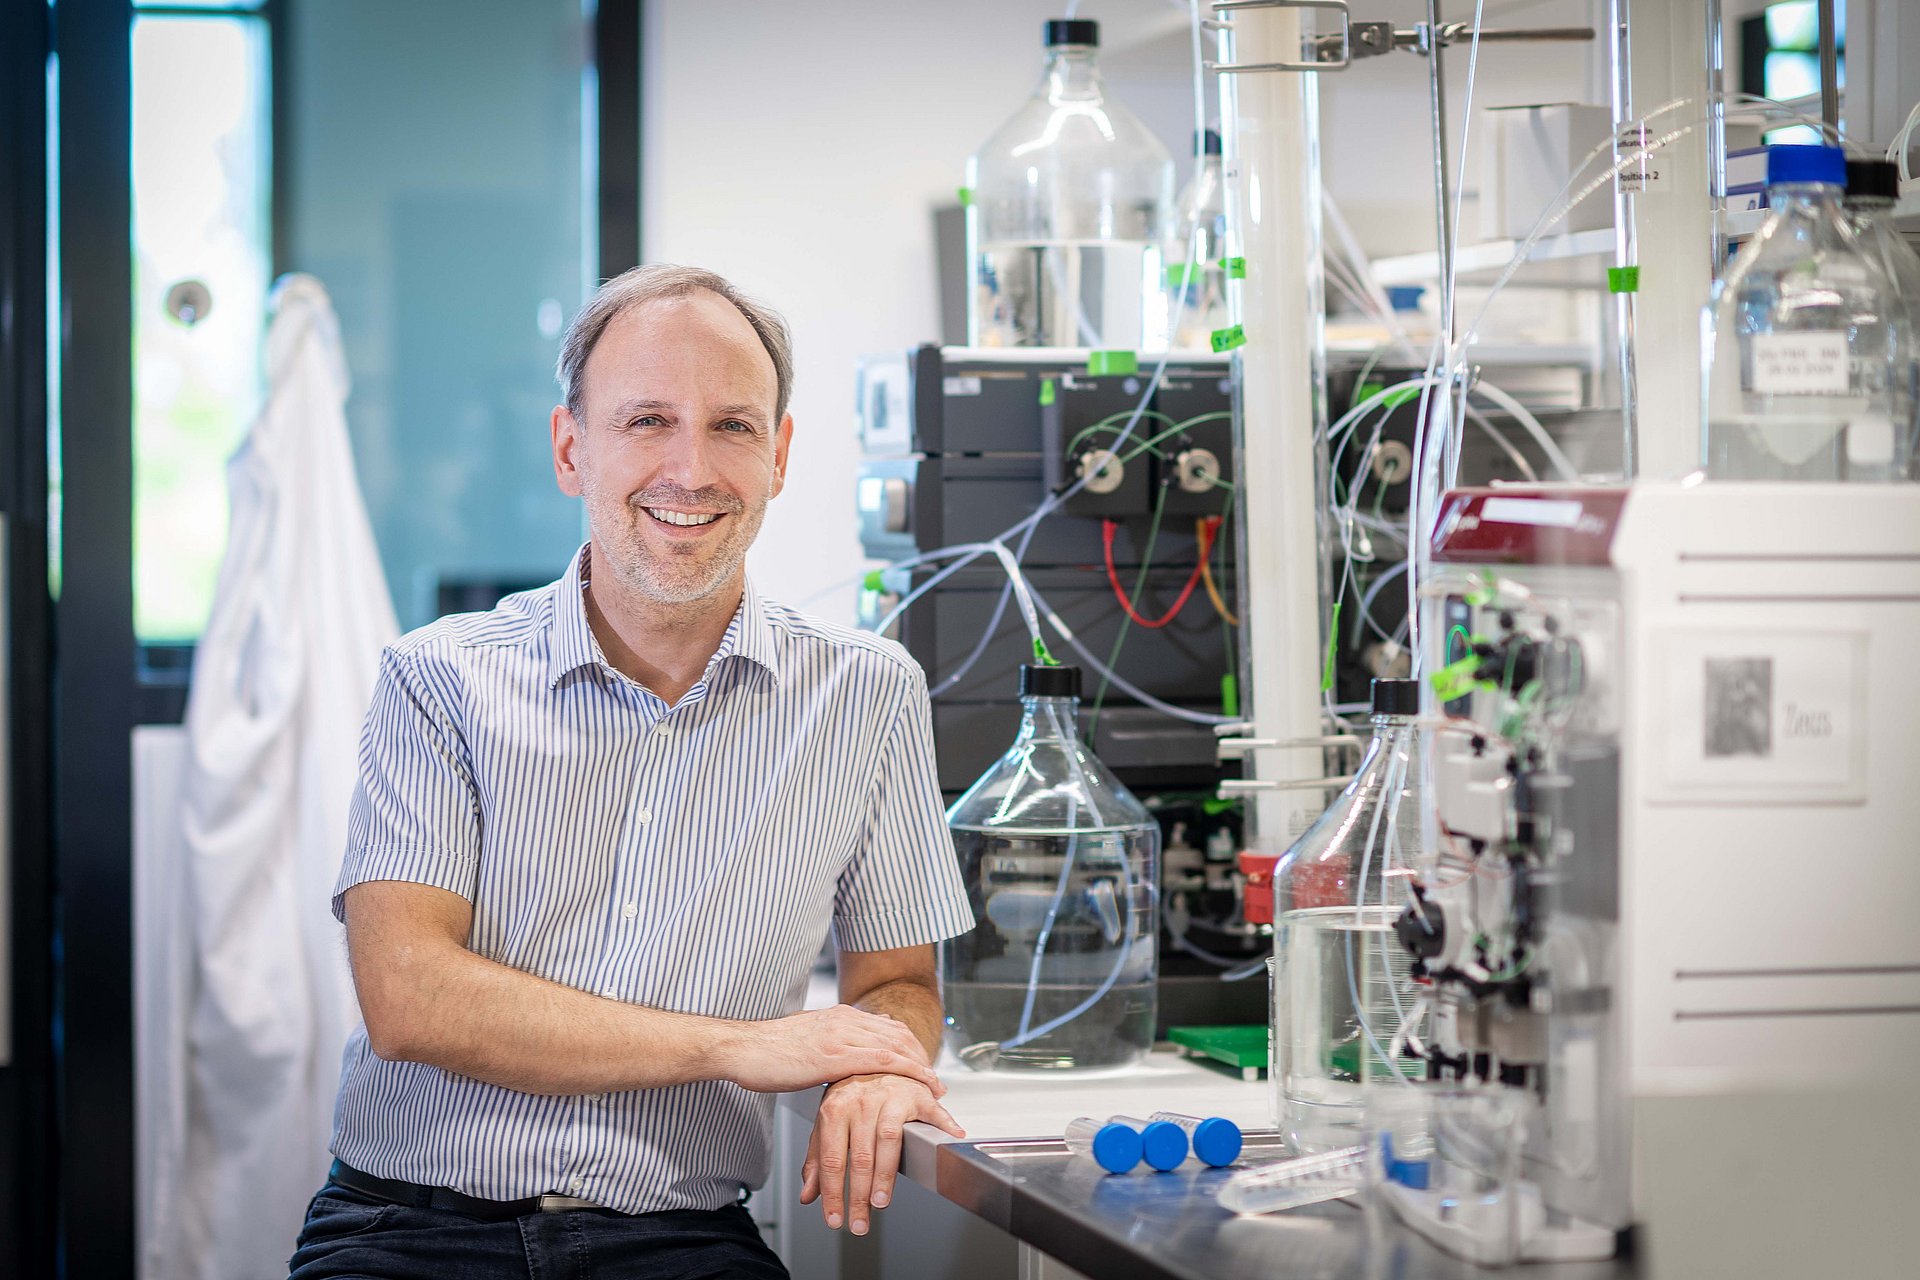 Oliver Lieleg, Professor of Biopolymer Materials at TUM, and his team develop mucin-based materials for medical applications.